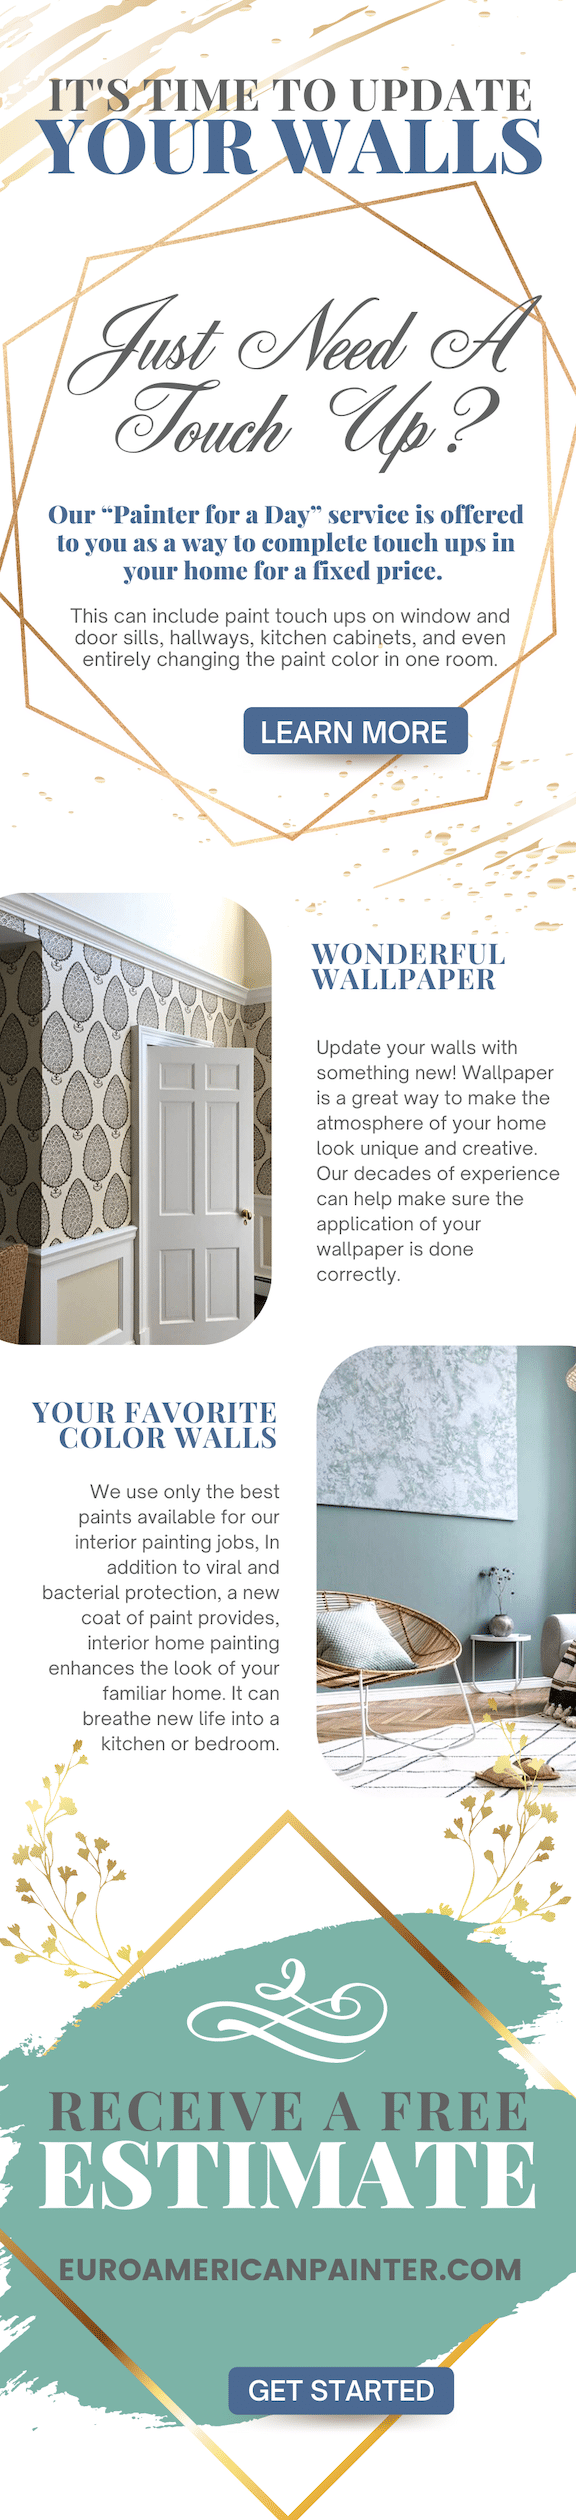 It's Time To Update Your Walls